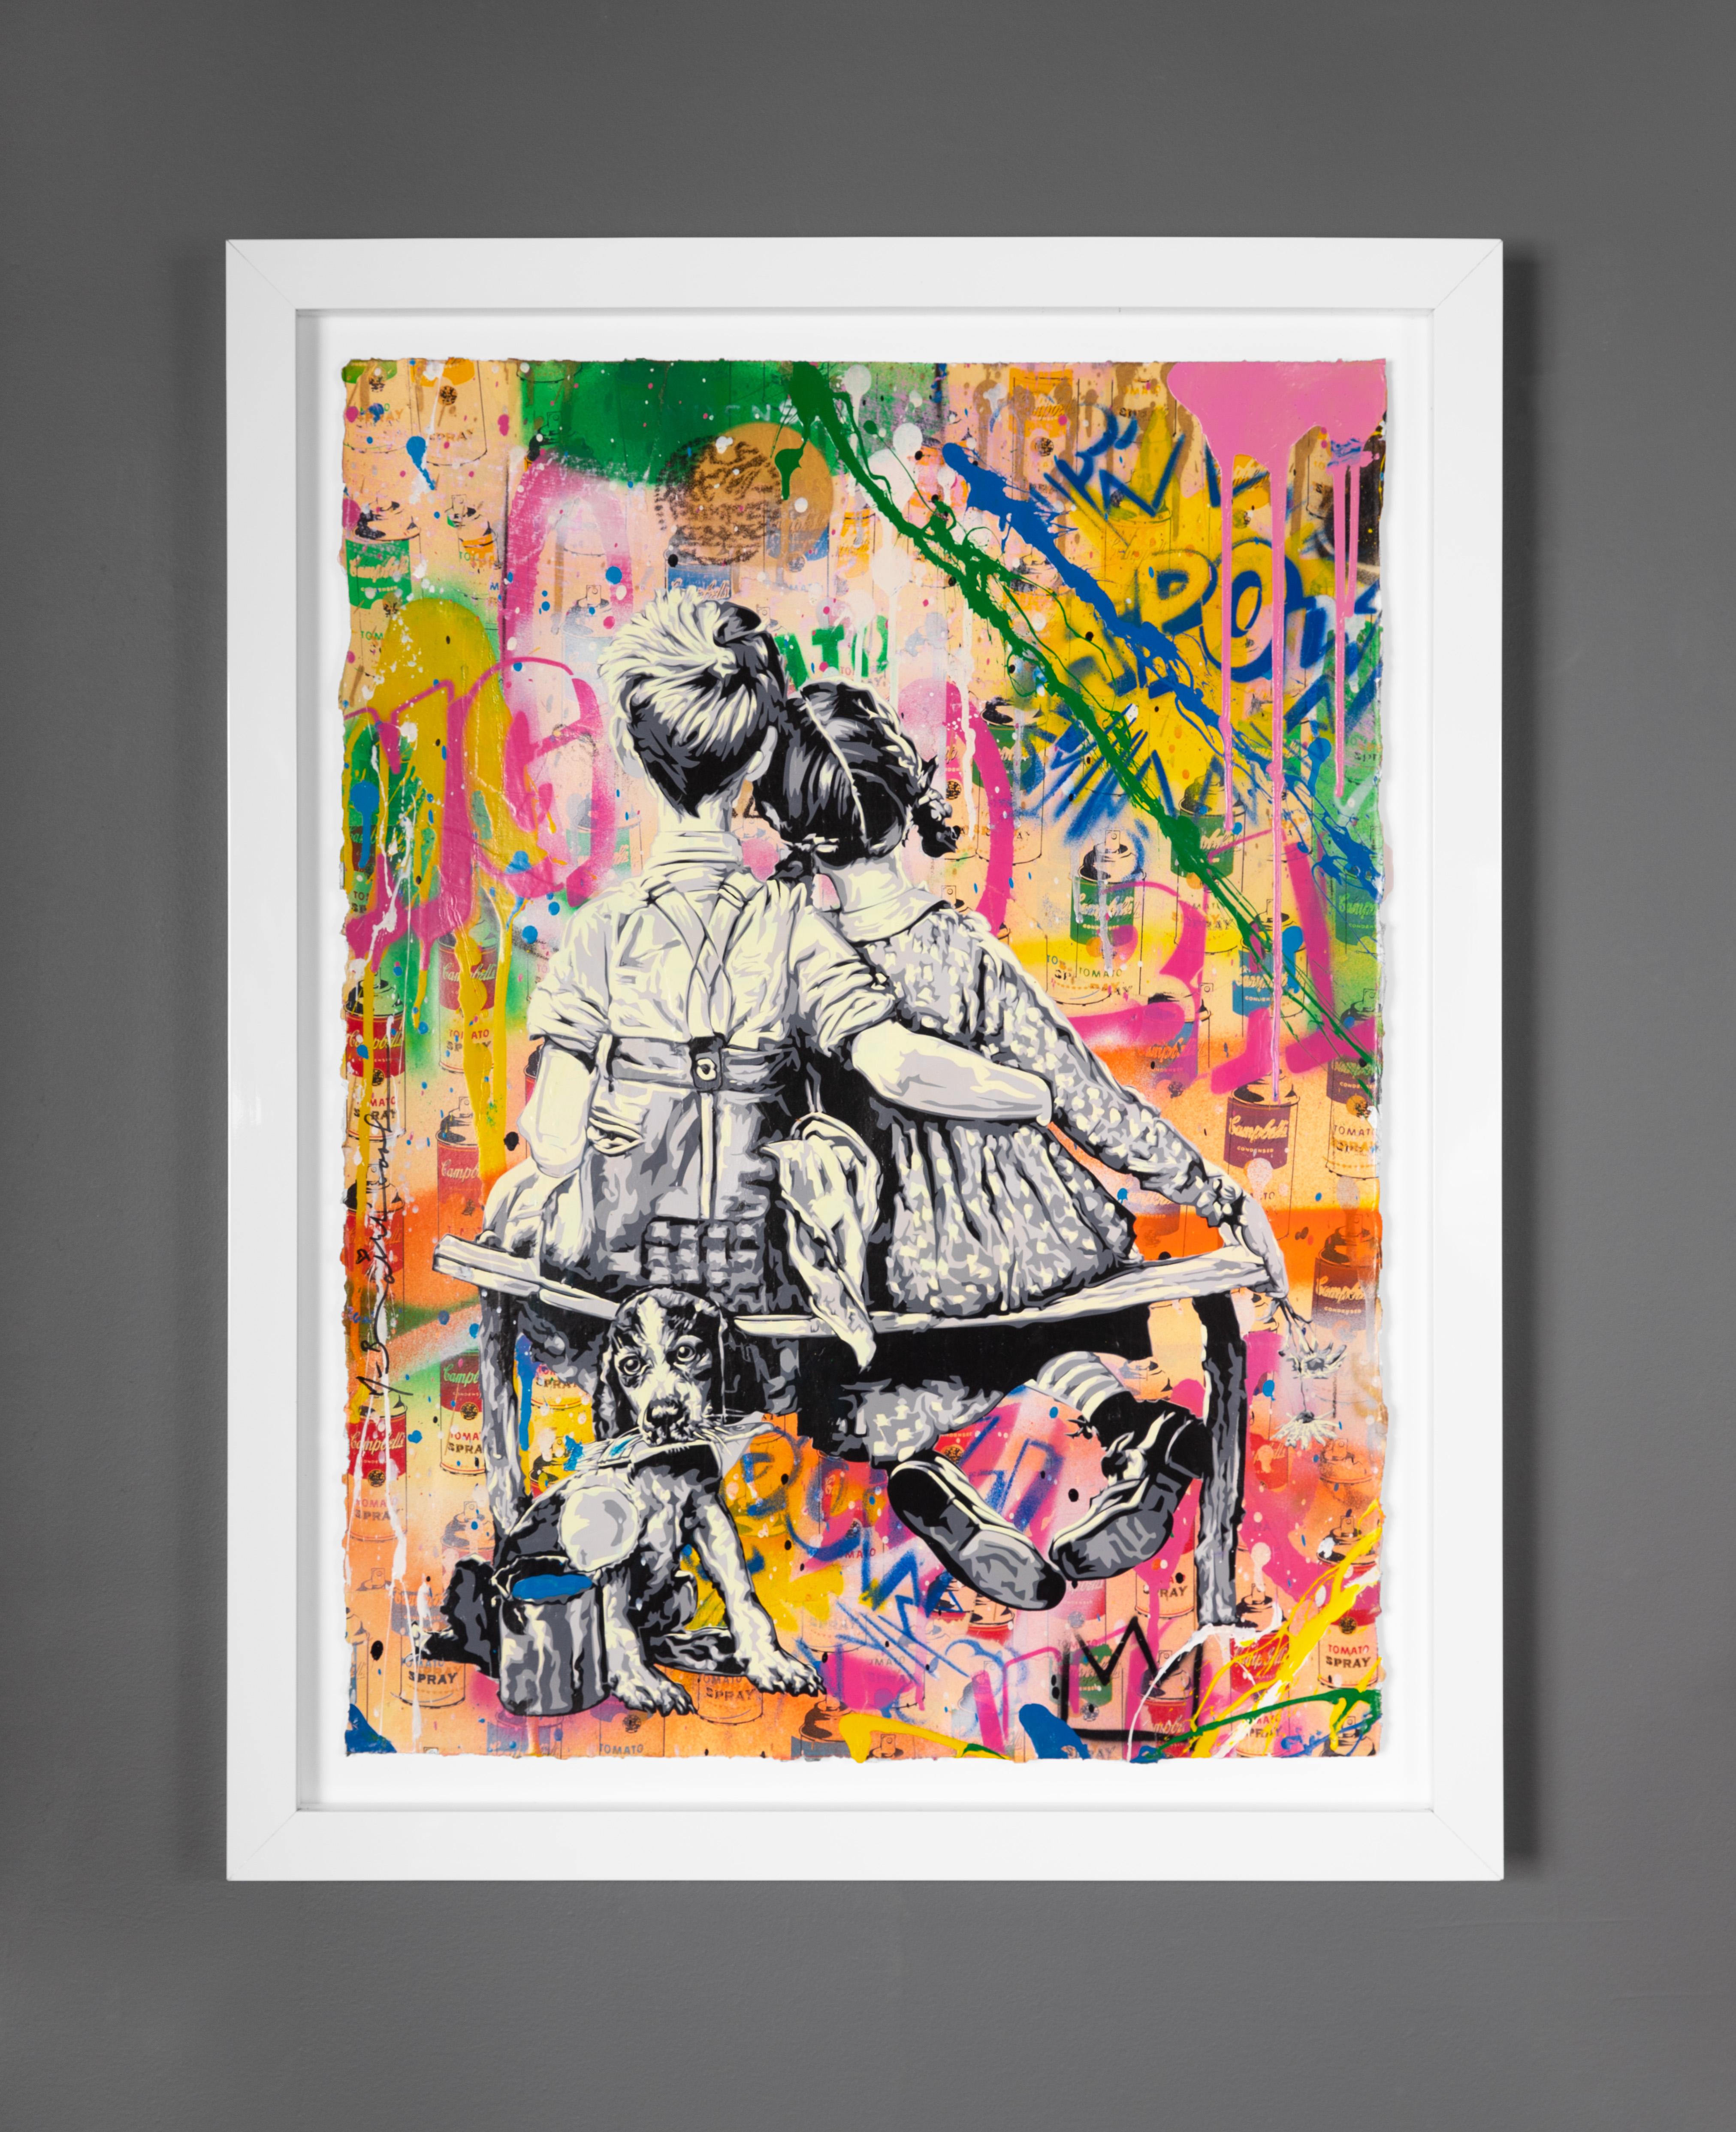 mr brainwash work well together for sale